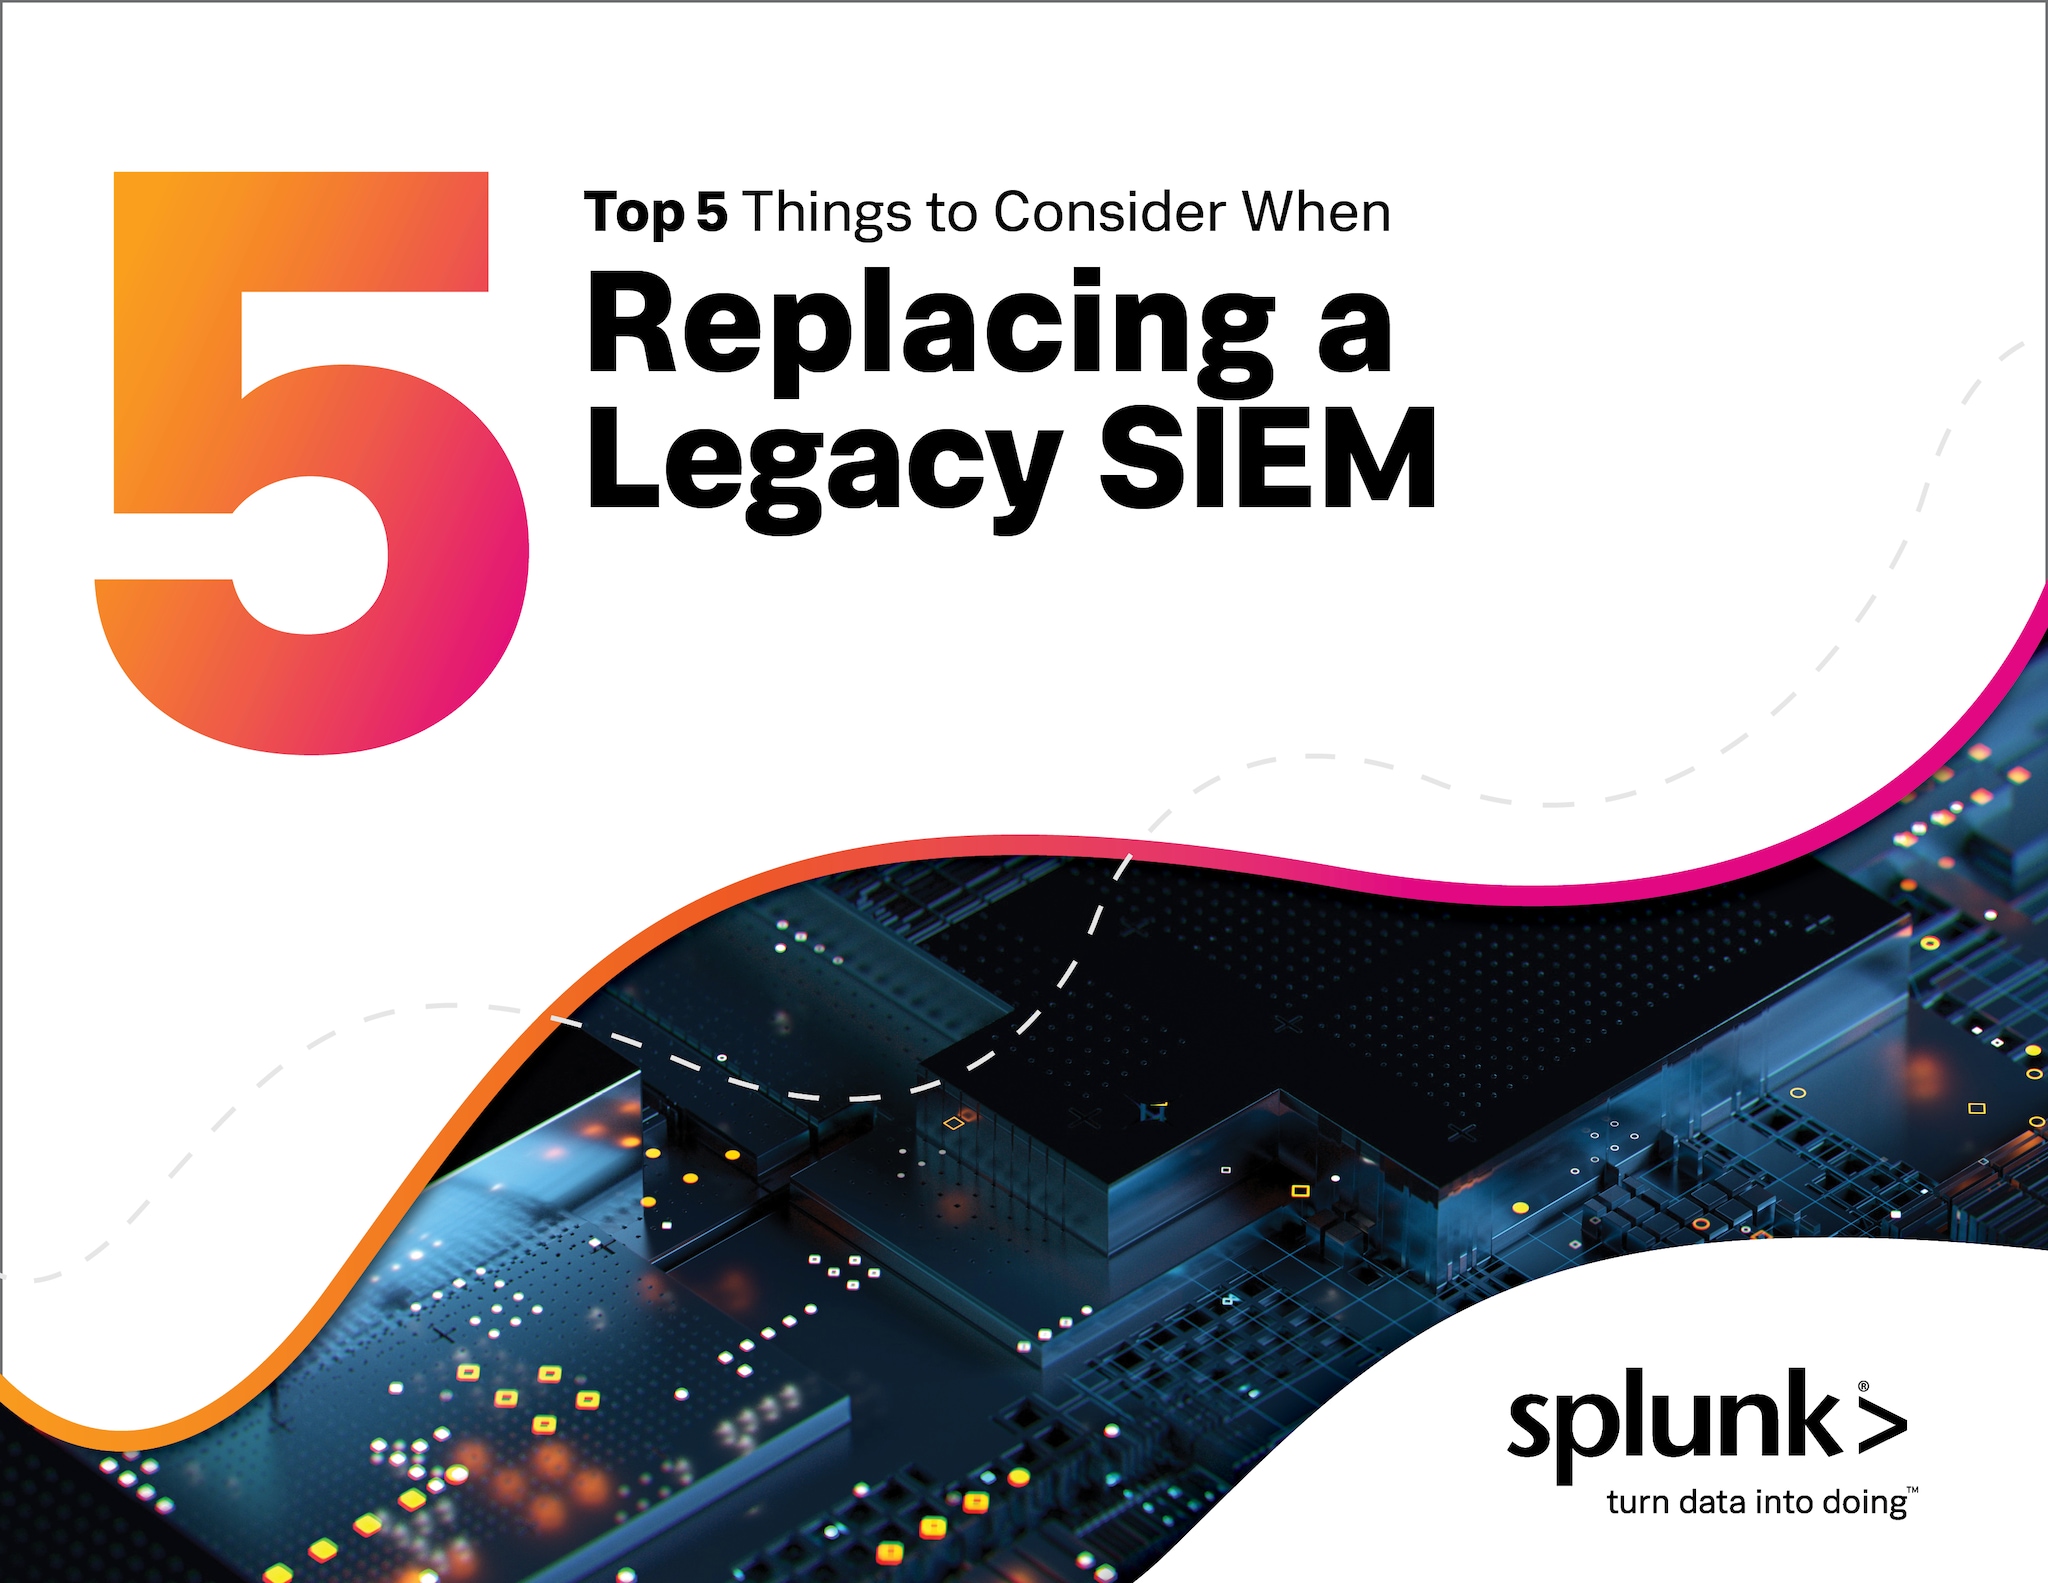 Top 5 Things to Consider When Replacing a Legacy SIEM